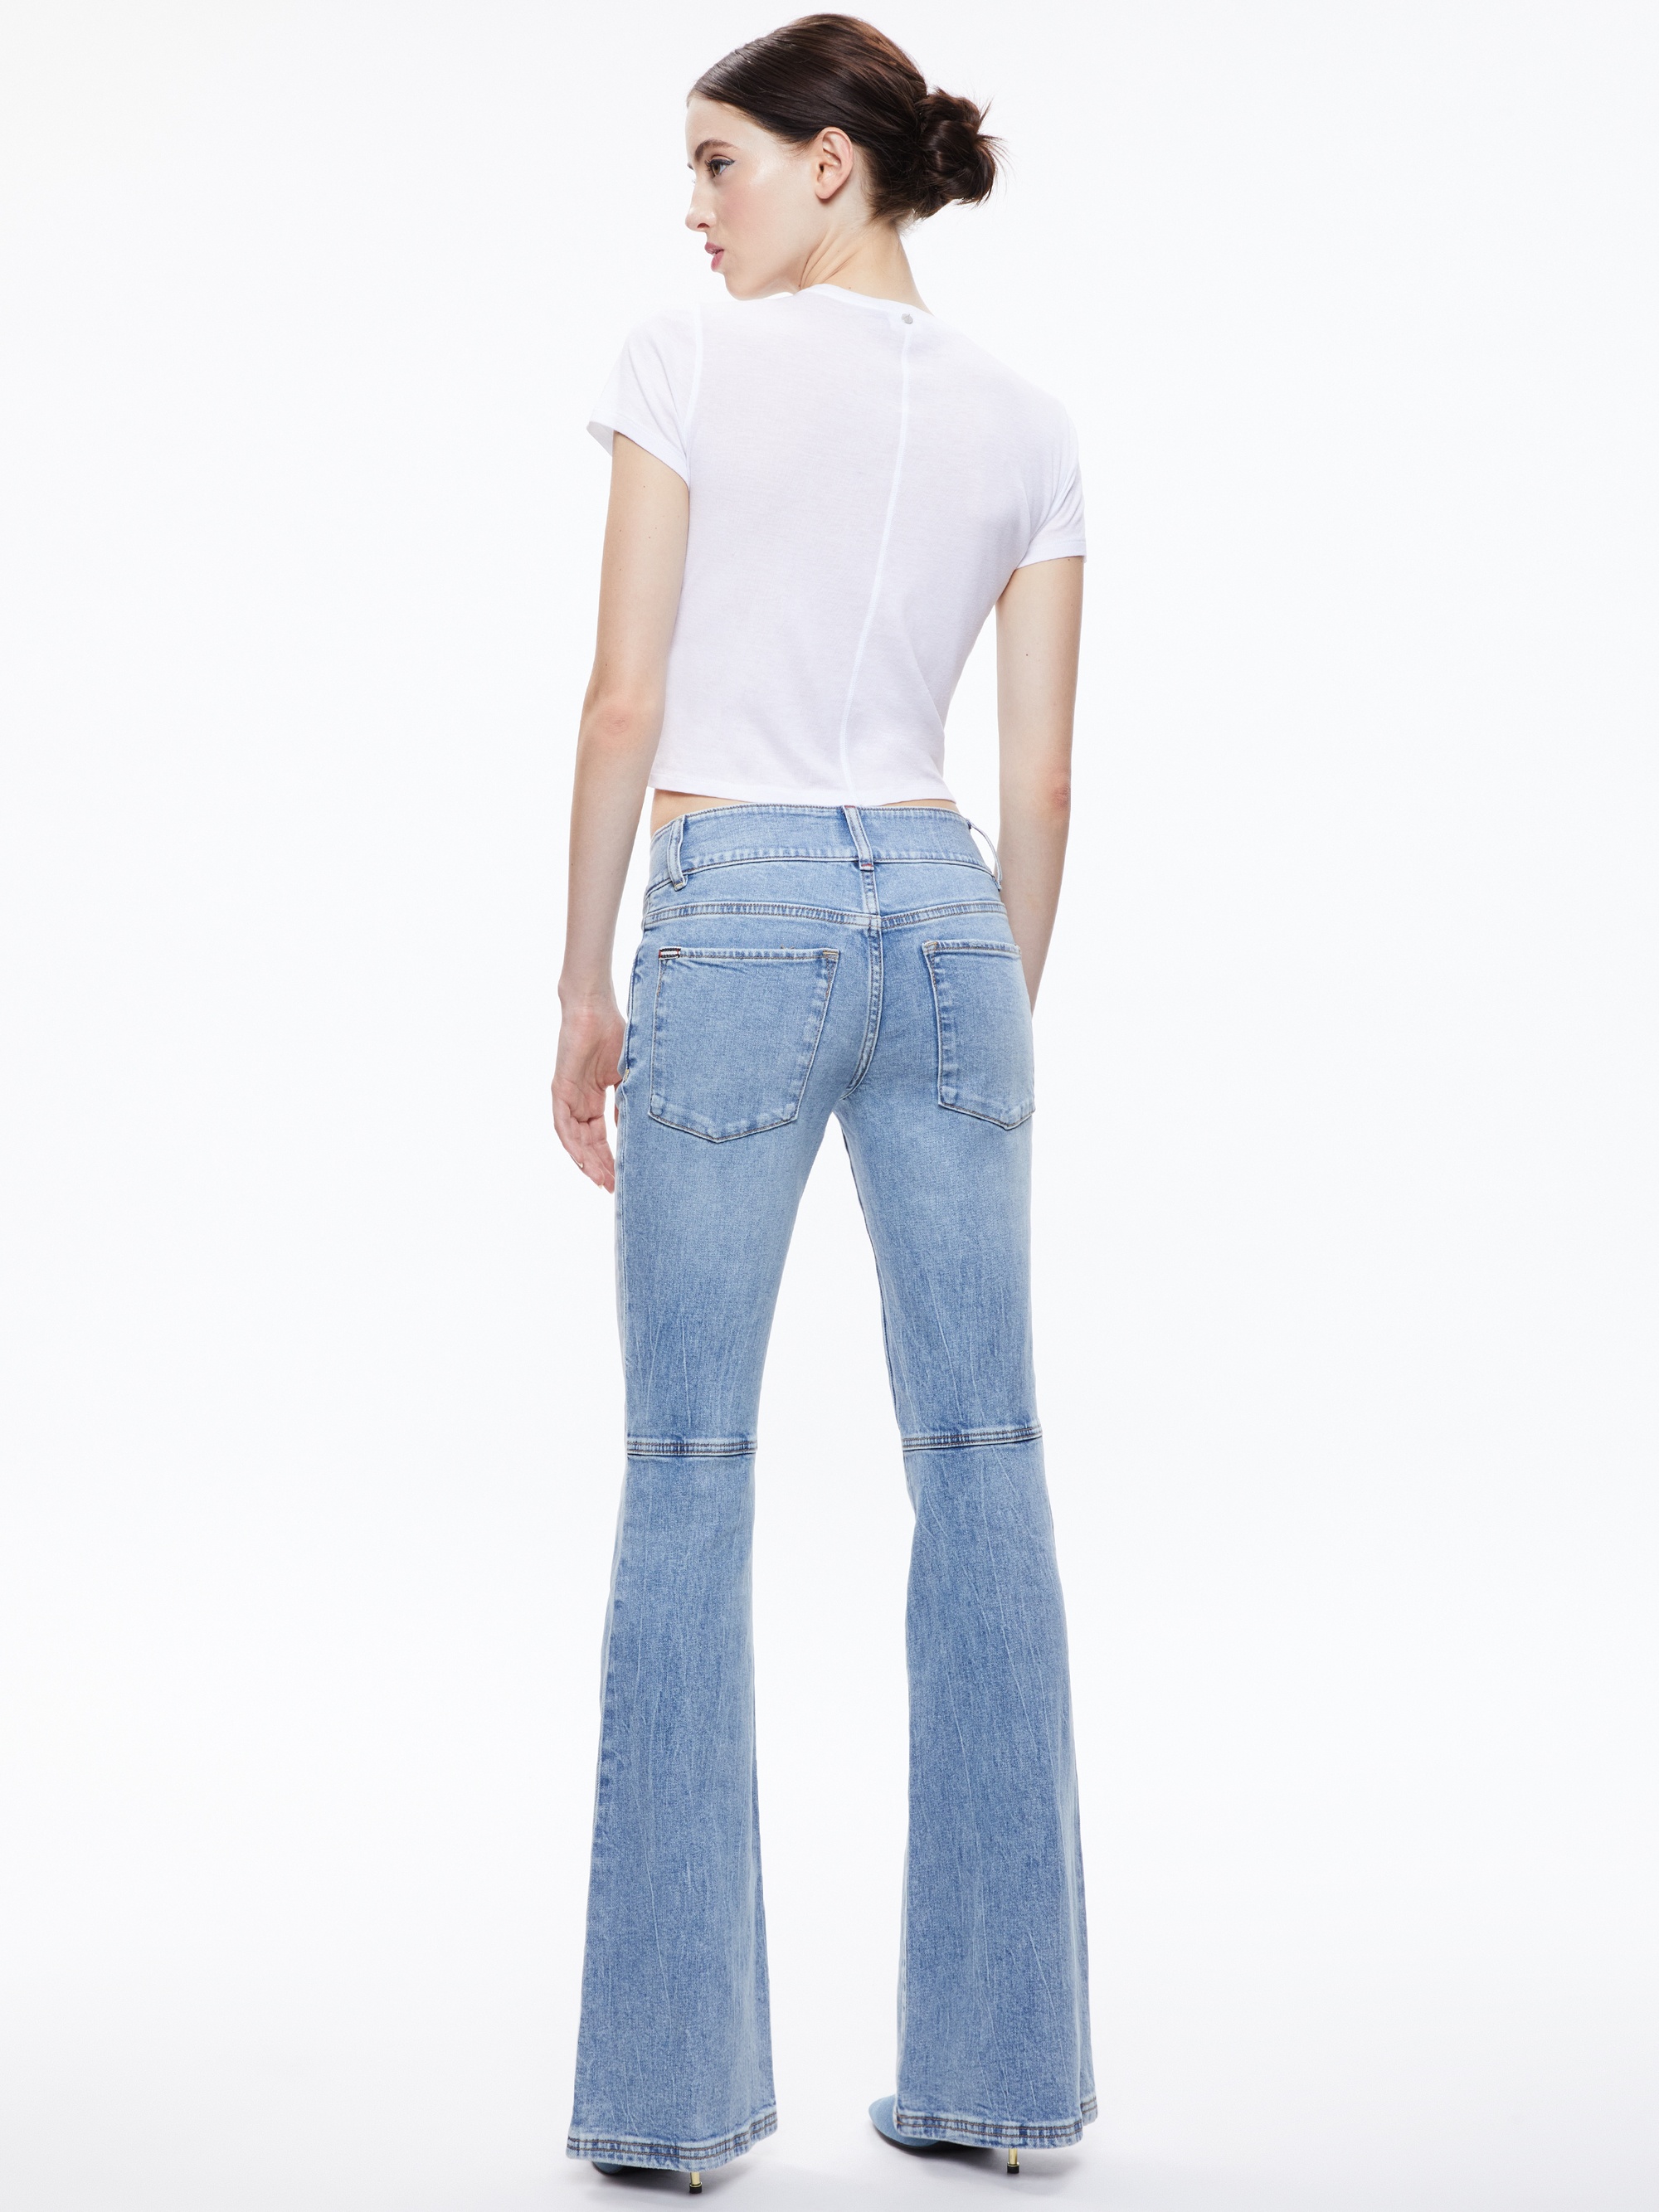 STACEY LOW RISE BELL BOTTOM JEAN - 3